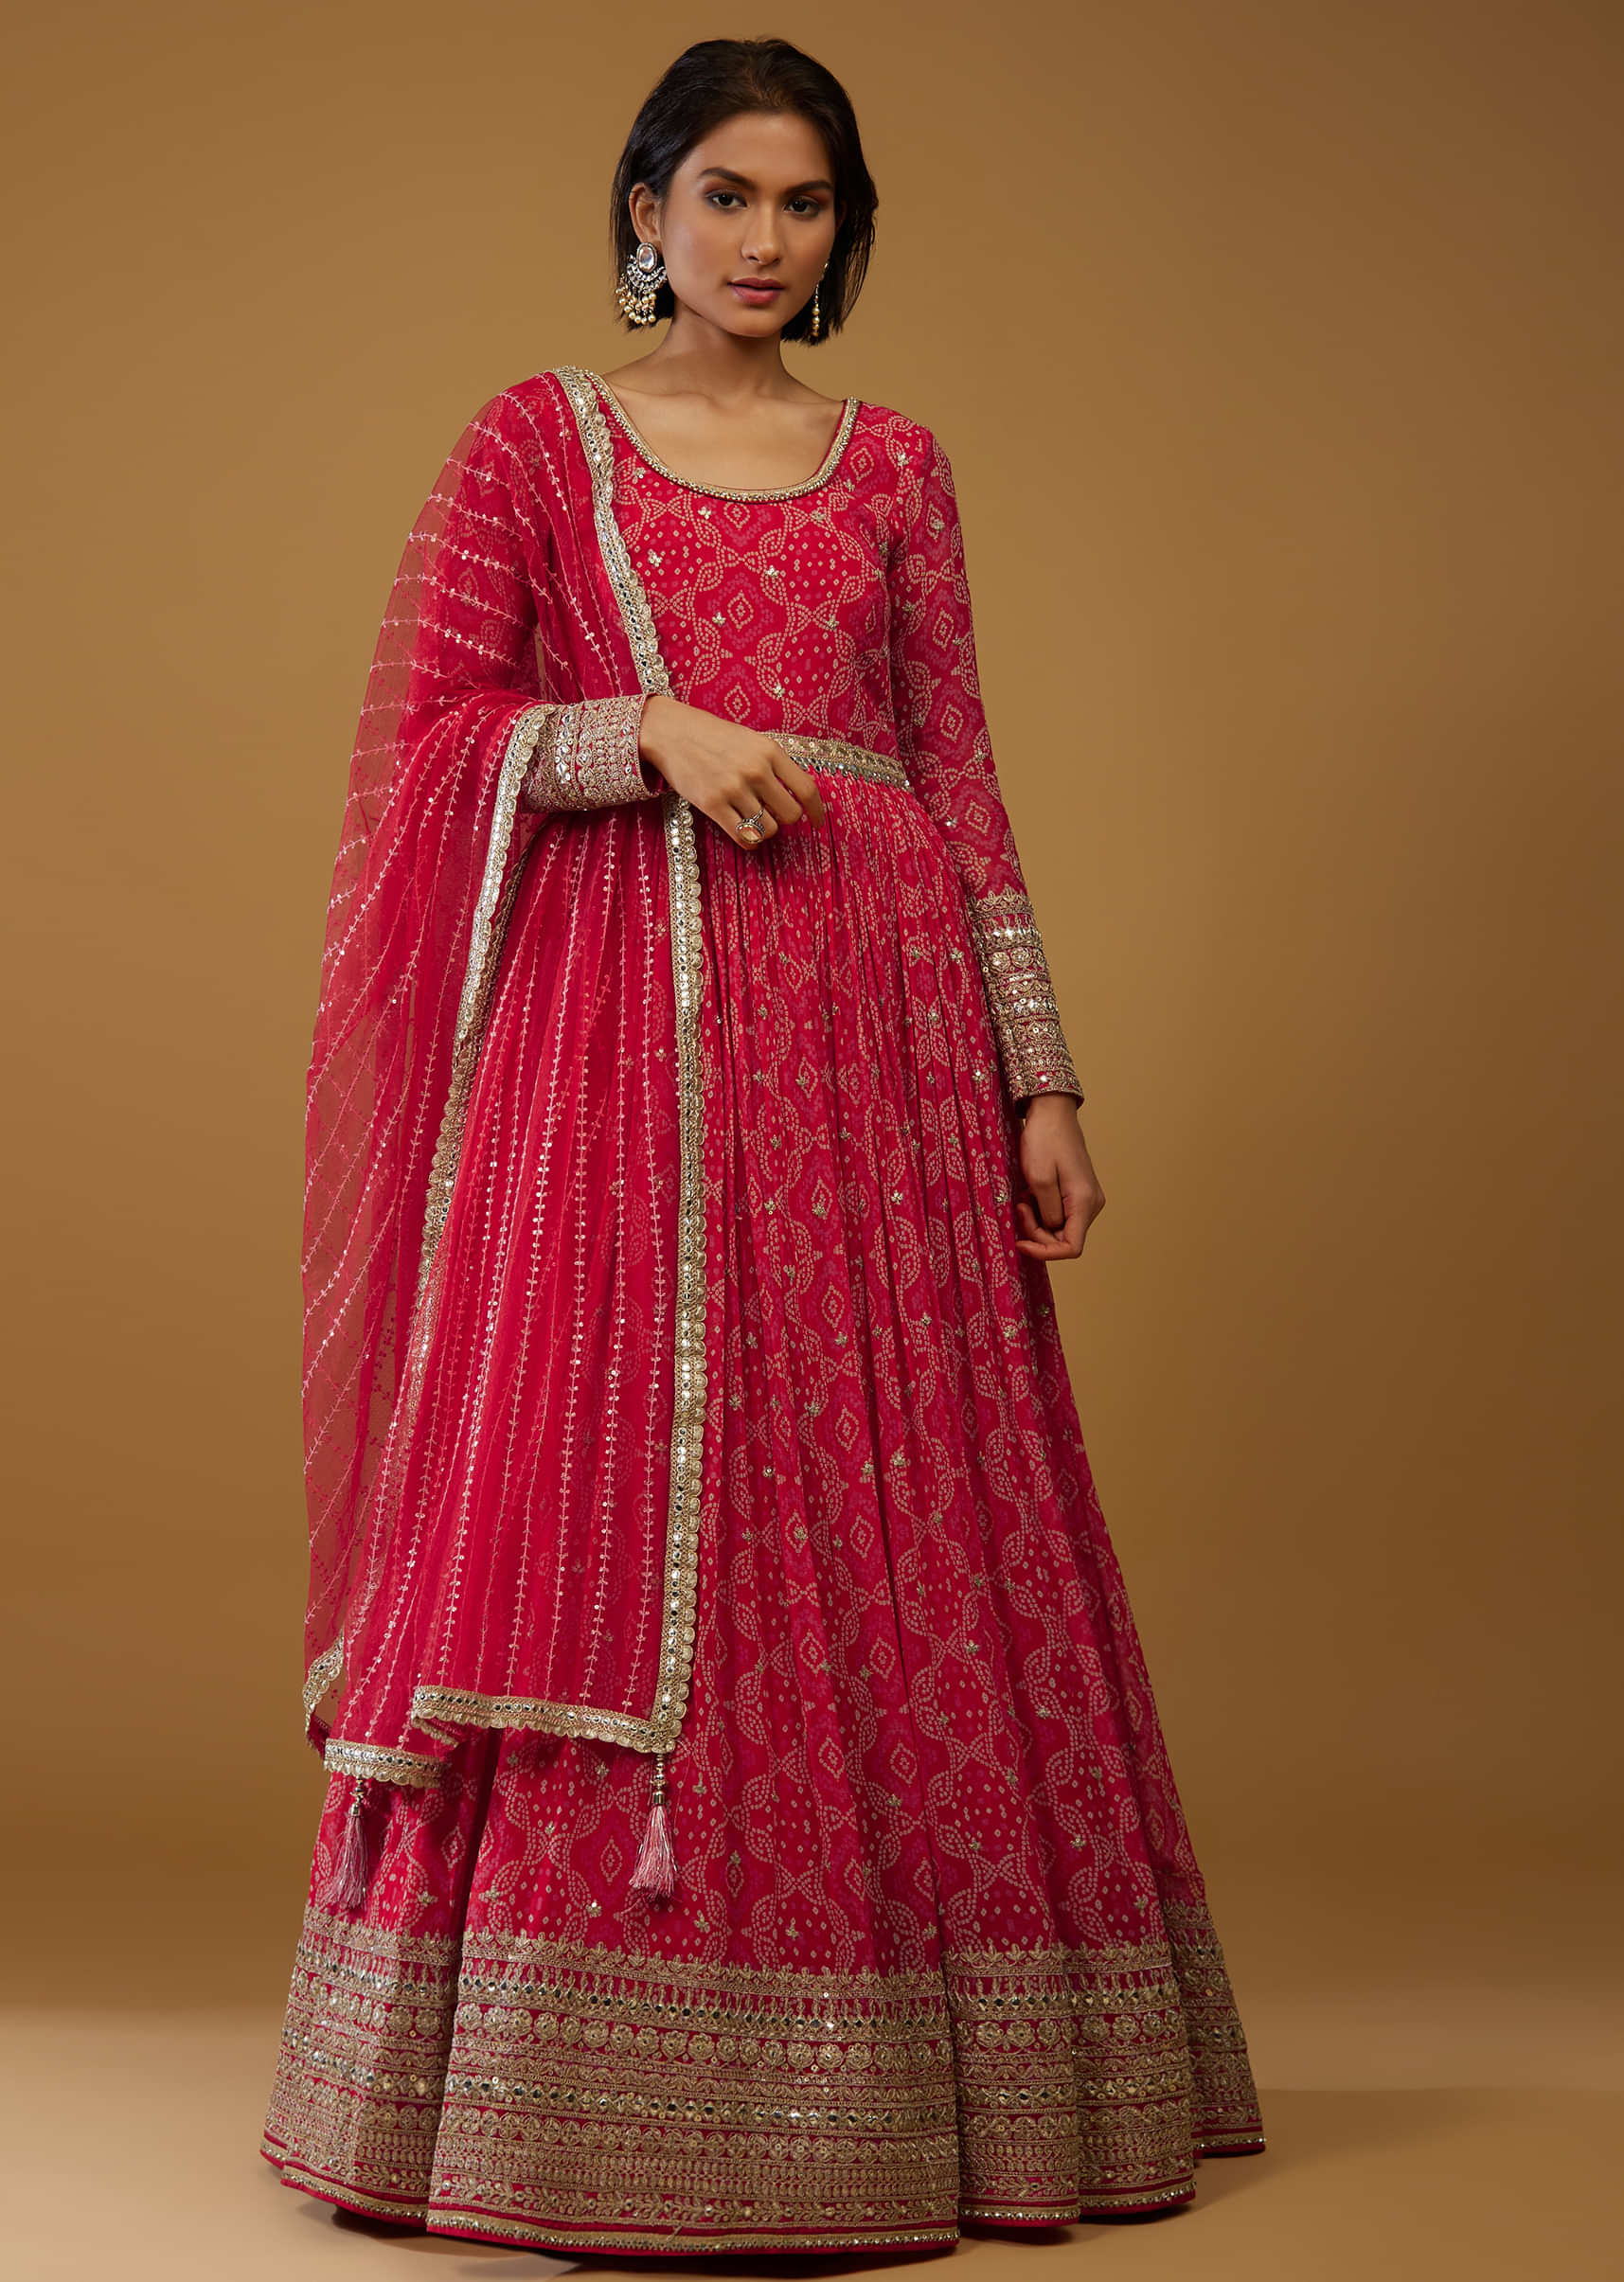 Valentine Red Anarkali Suit With Bandhani Print And Embroidery